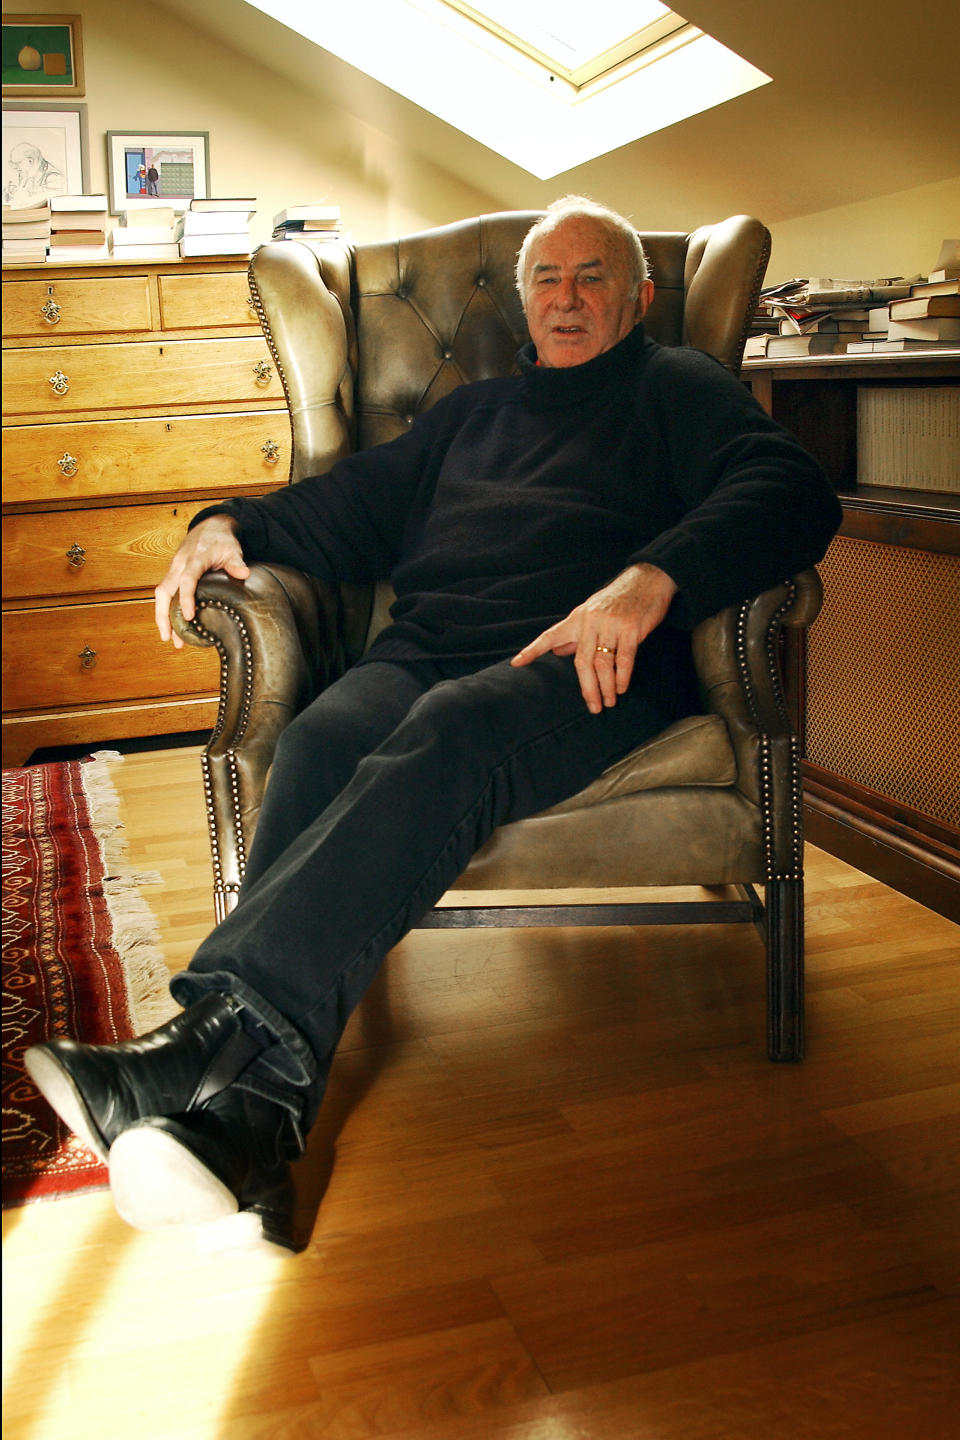 File photo dated 19/02/02 of Clive James at his home in Bermondsey, London. Poet, critic and broadcaster Clive James has died at the age of 80, his agents have said.